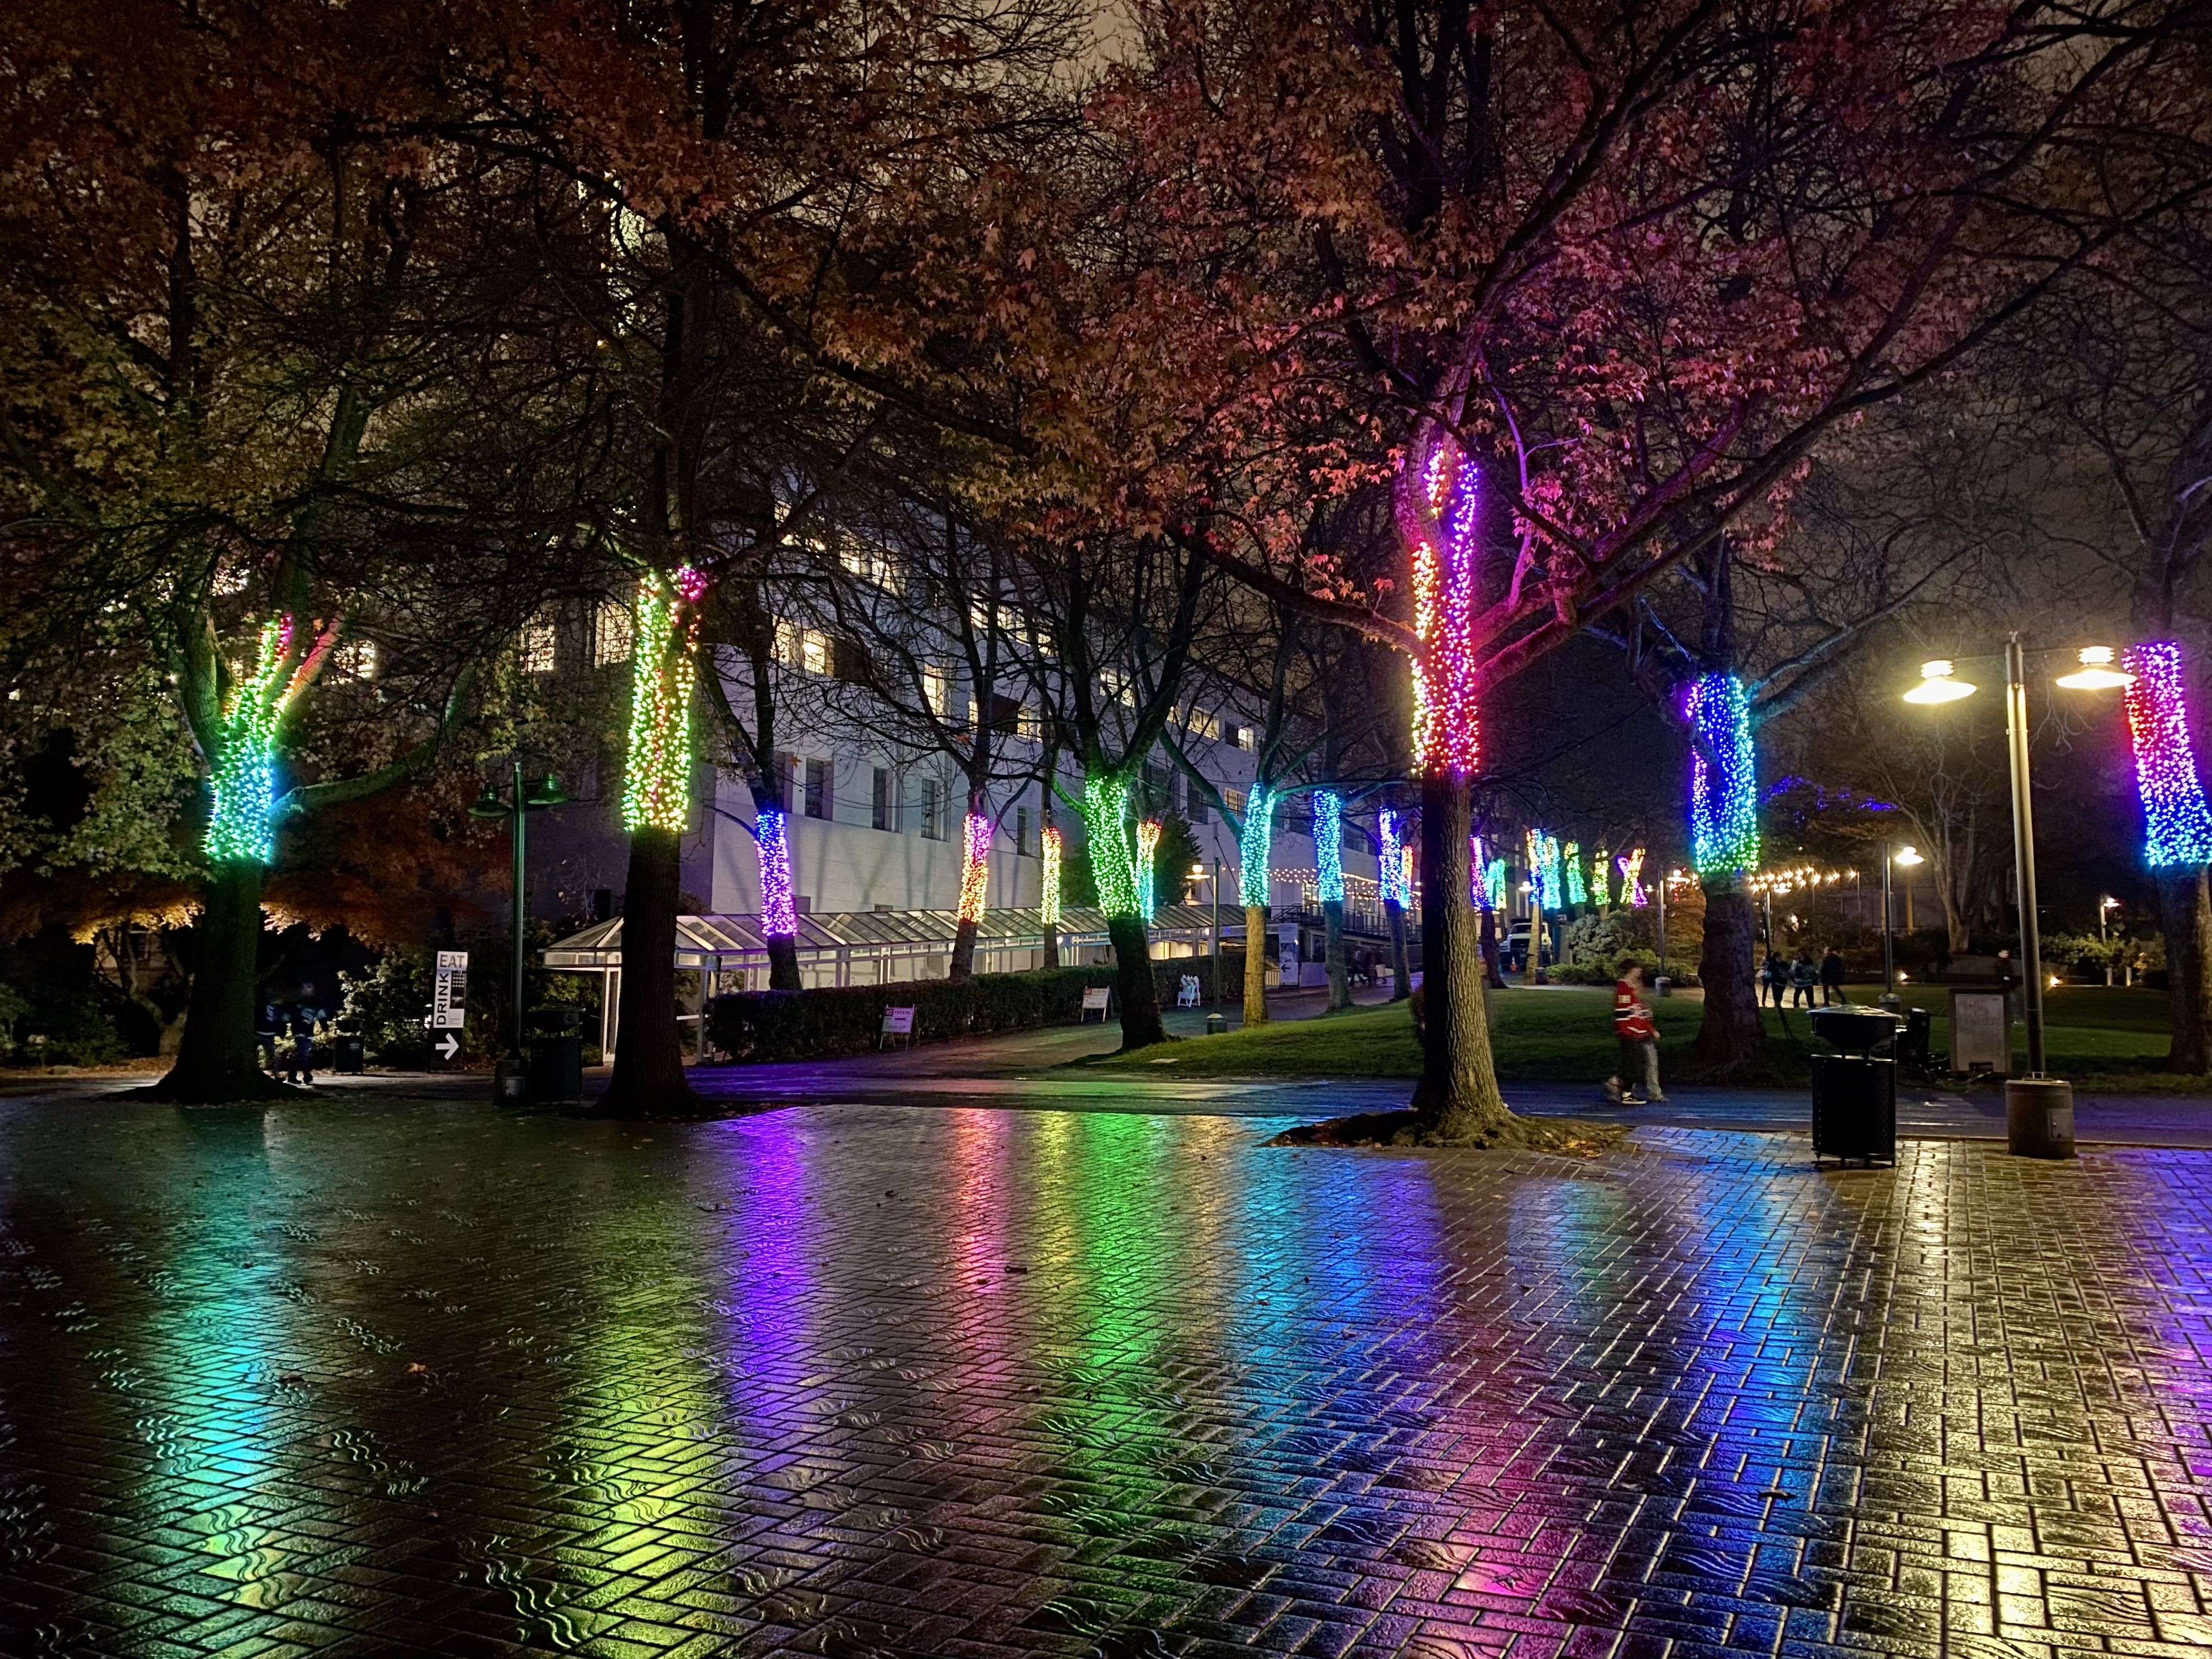 Lights strung around the trunks of Christmas trees shine different colors, with lights reflected on the wet pavement below. 